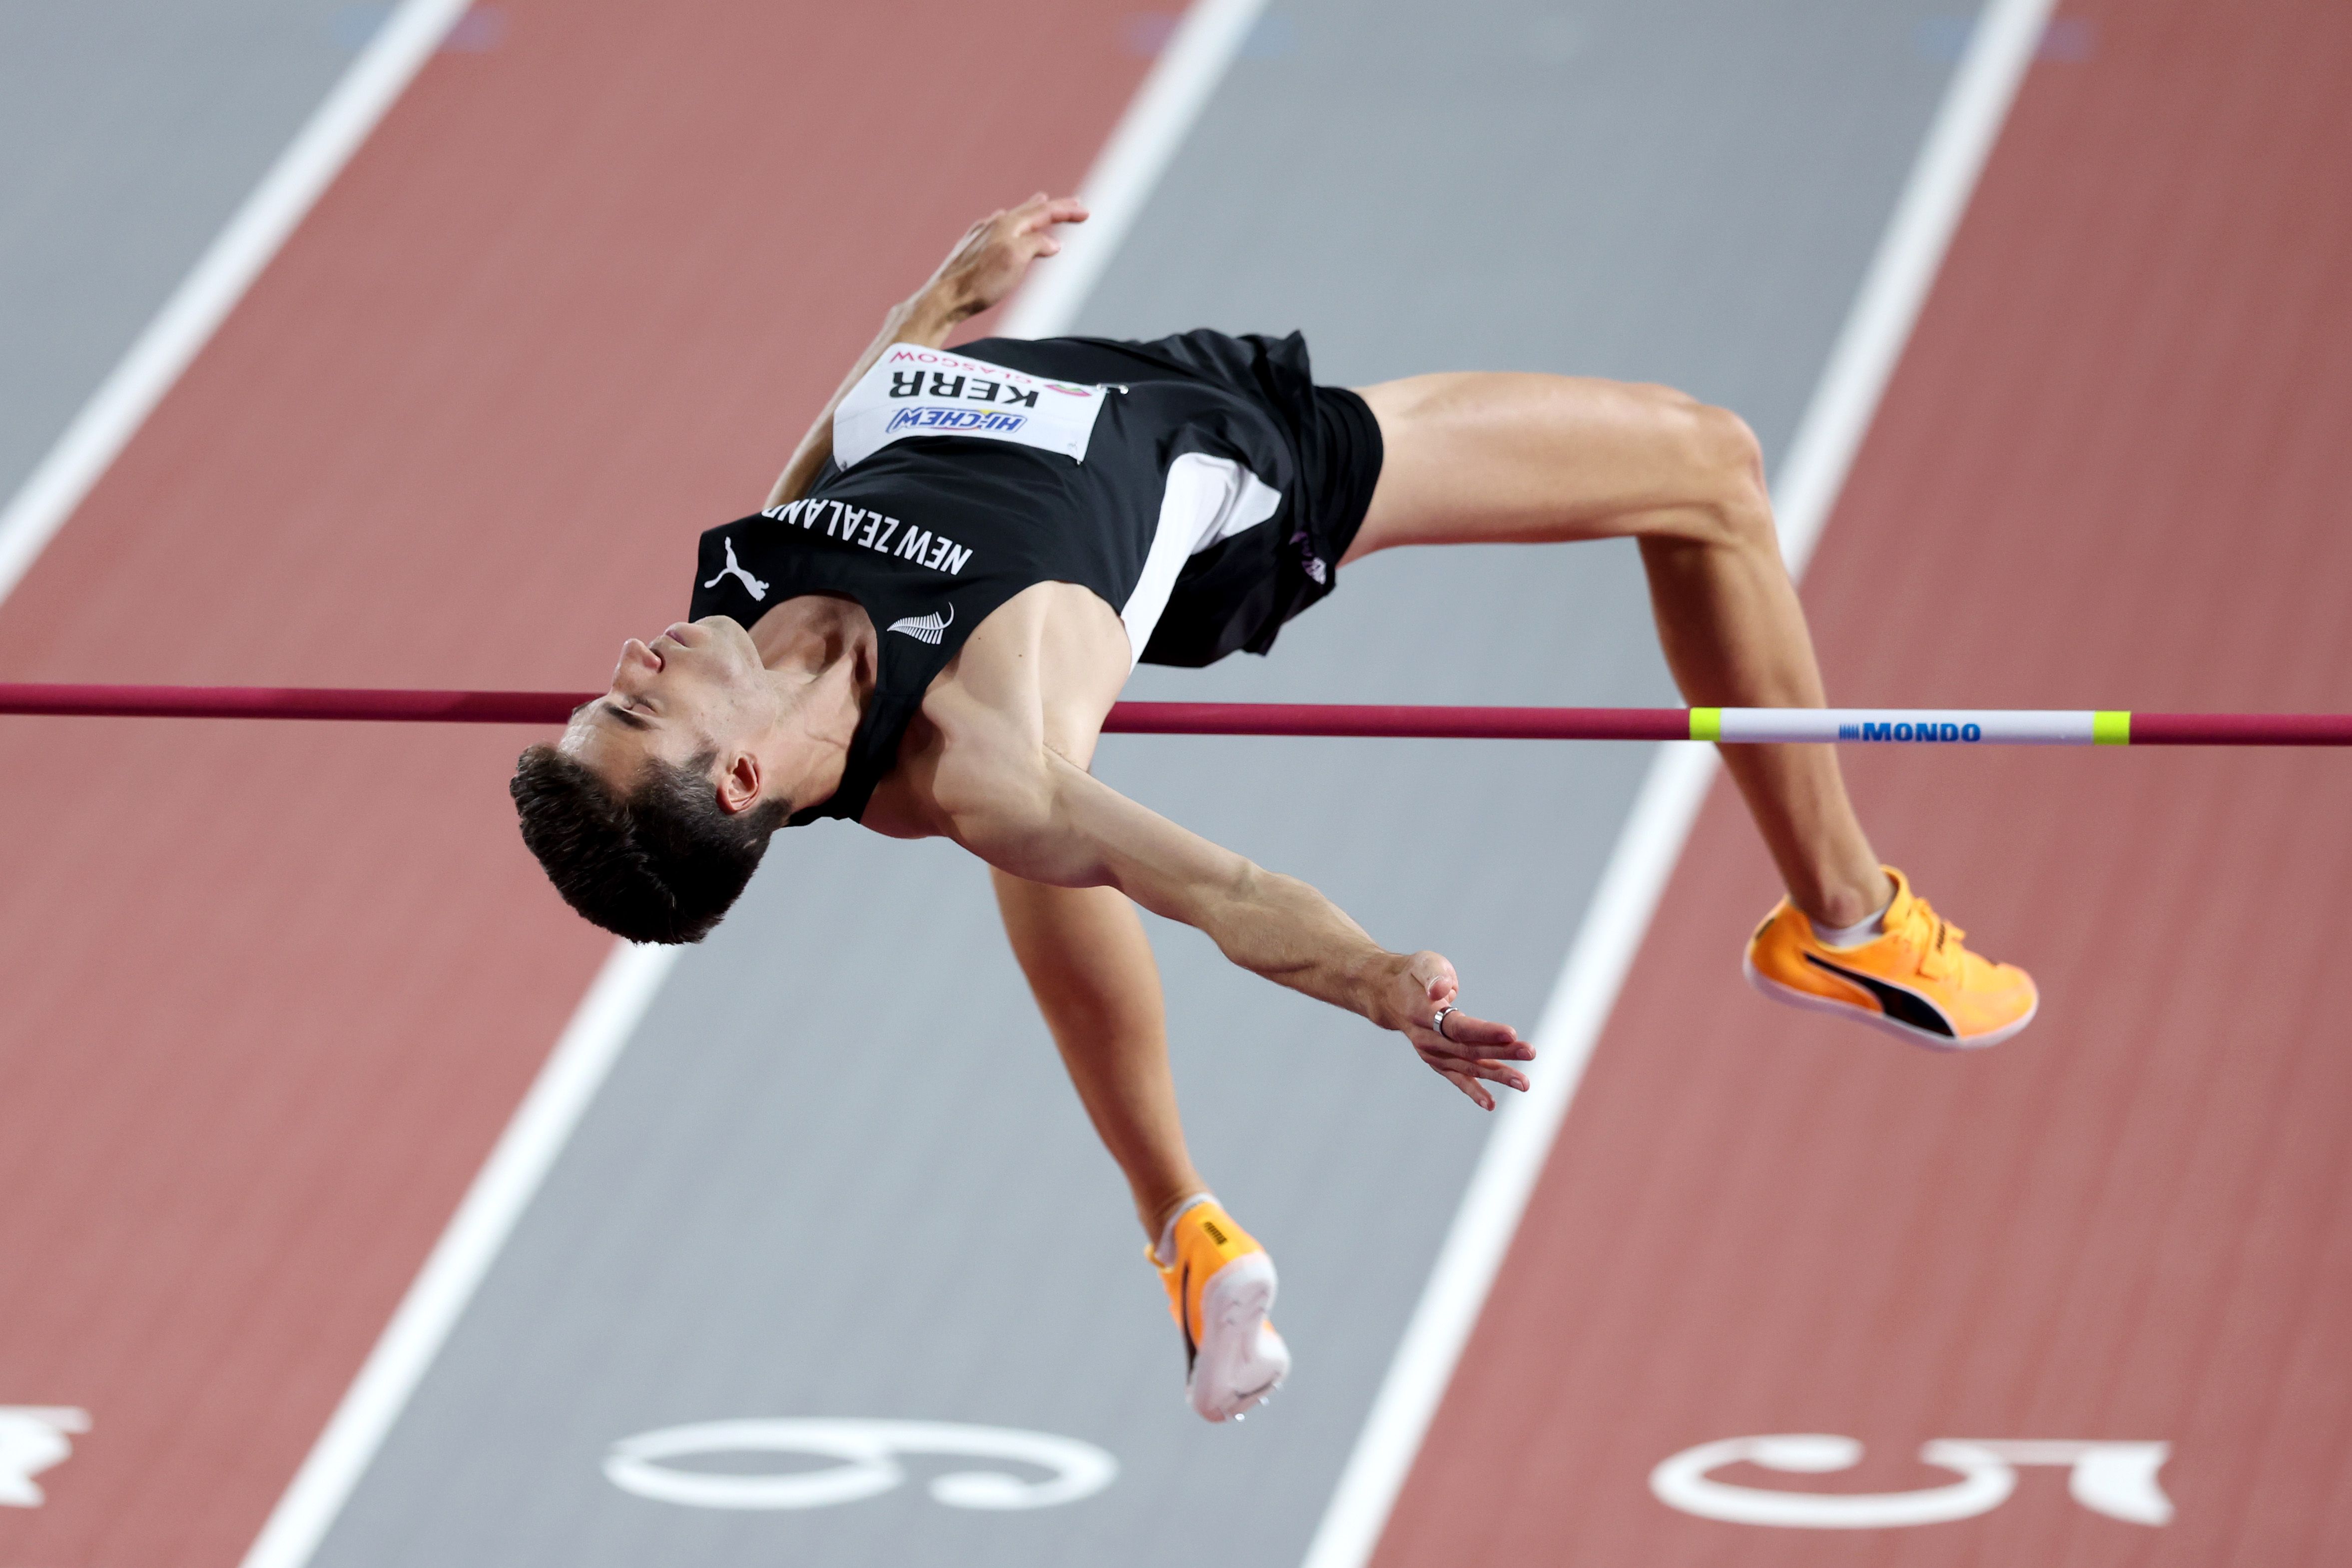 Hamish Kerr in the high jump at the World Athletics Indoor Championships Glasgow 24